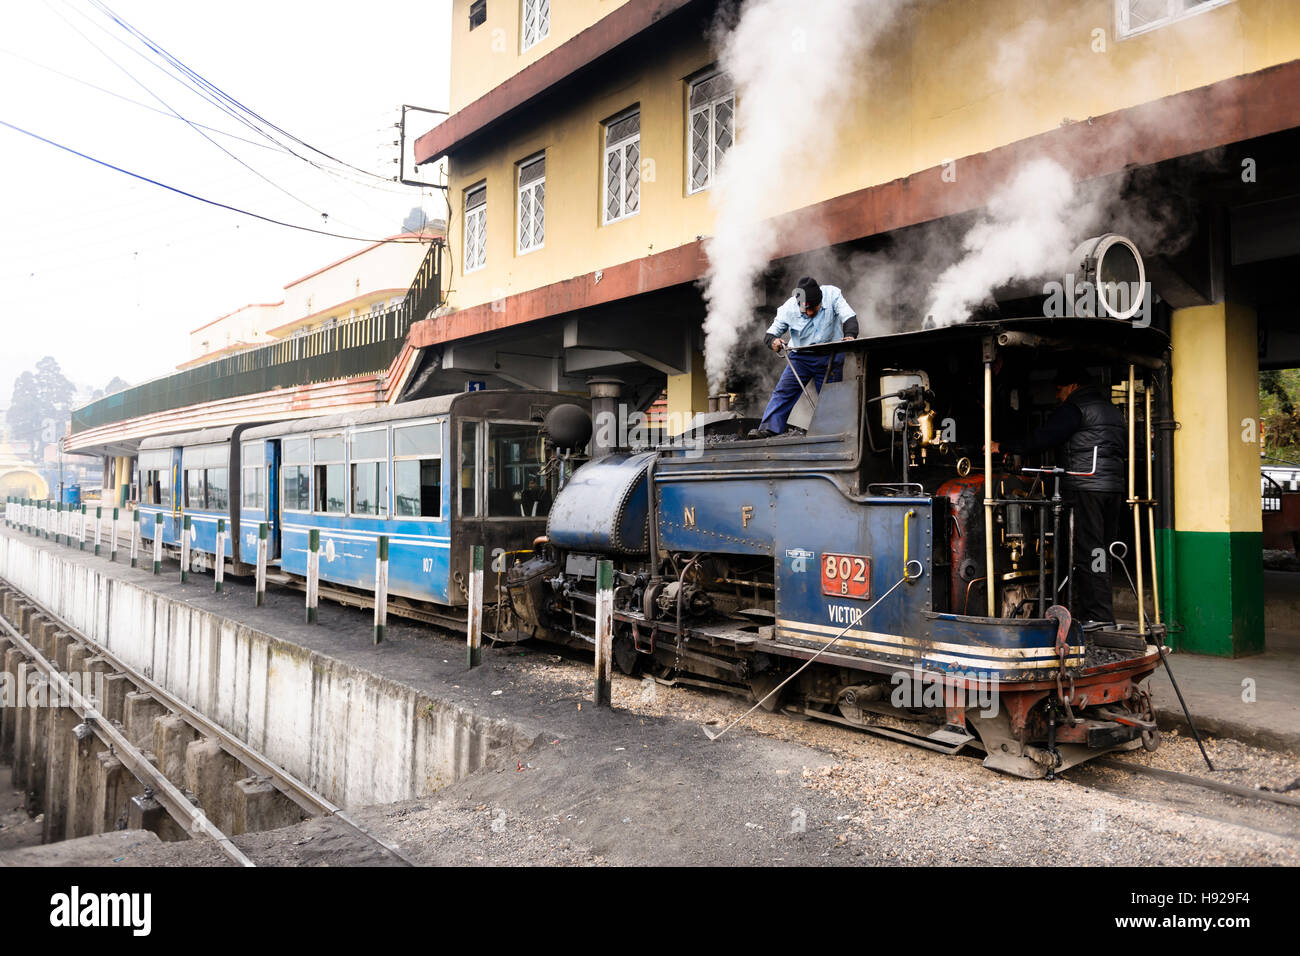 The steam train also referred to as the Toy Train at Darjeeling Railway Station. Stock Photo